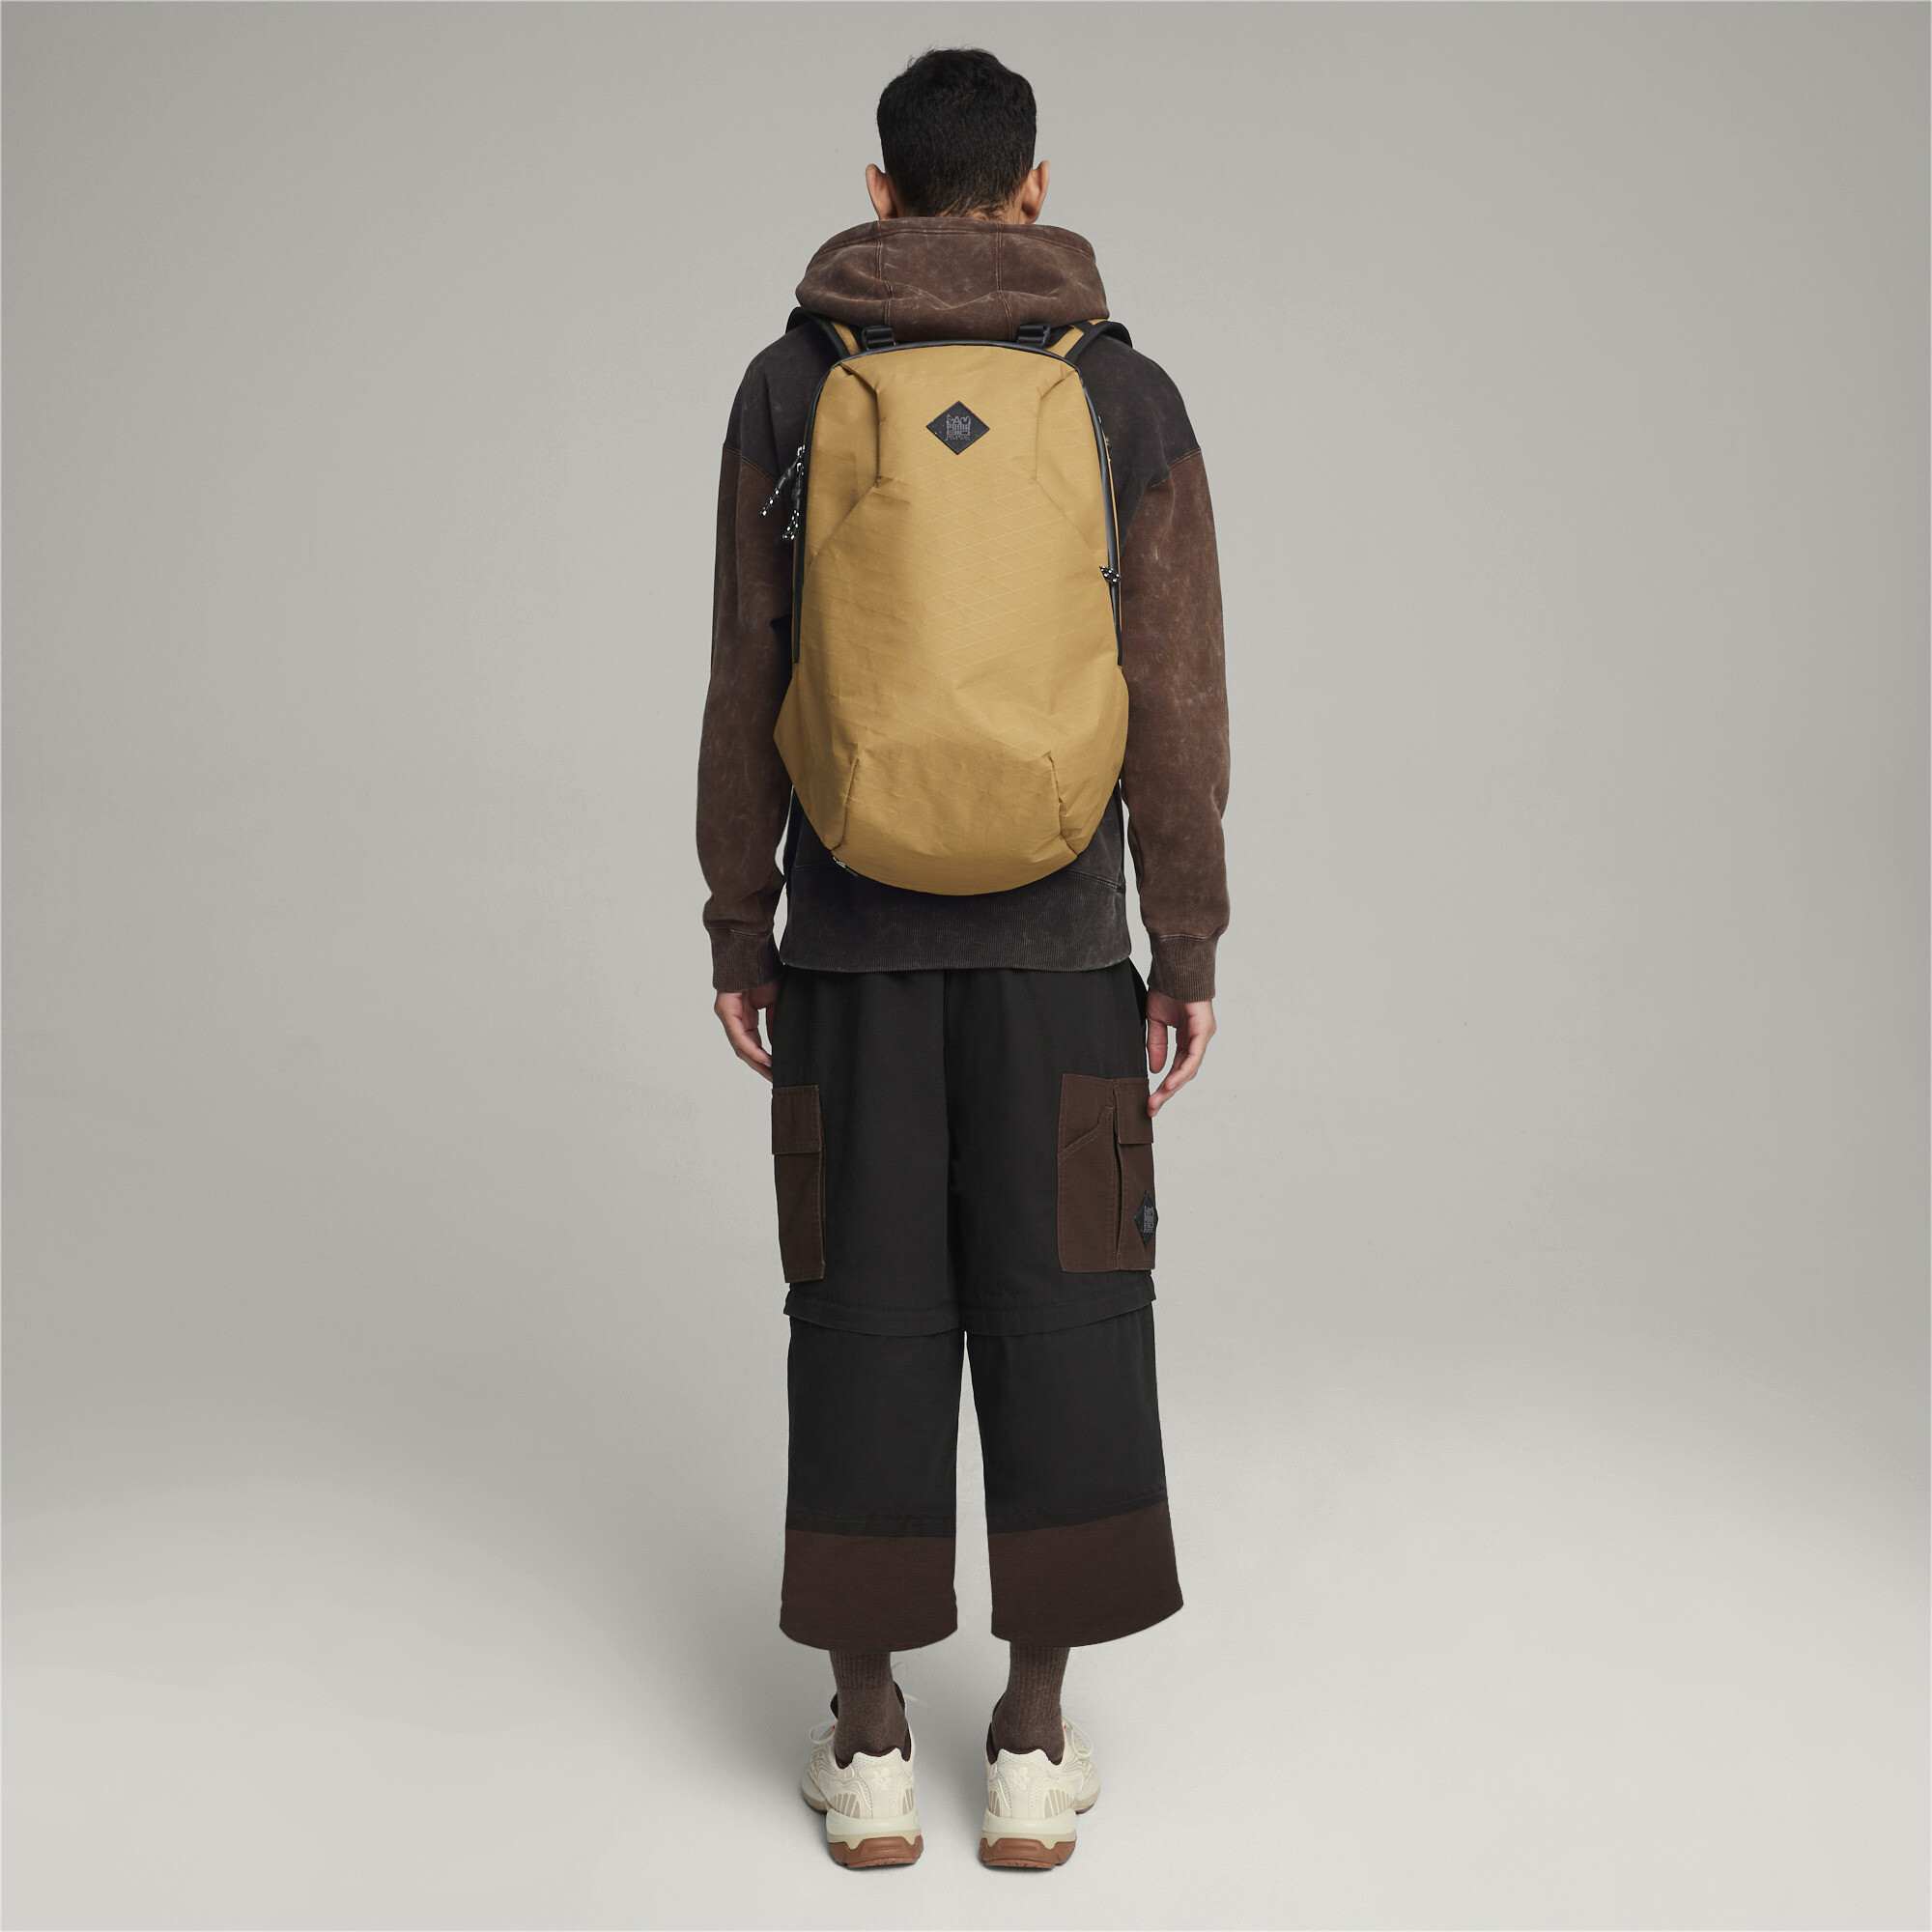 Men's Puma X PERKS AND MINI Backpack, Brown, Accessories